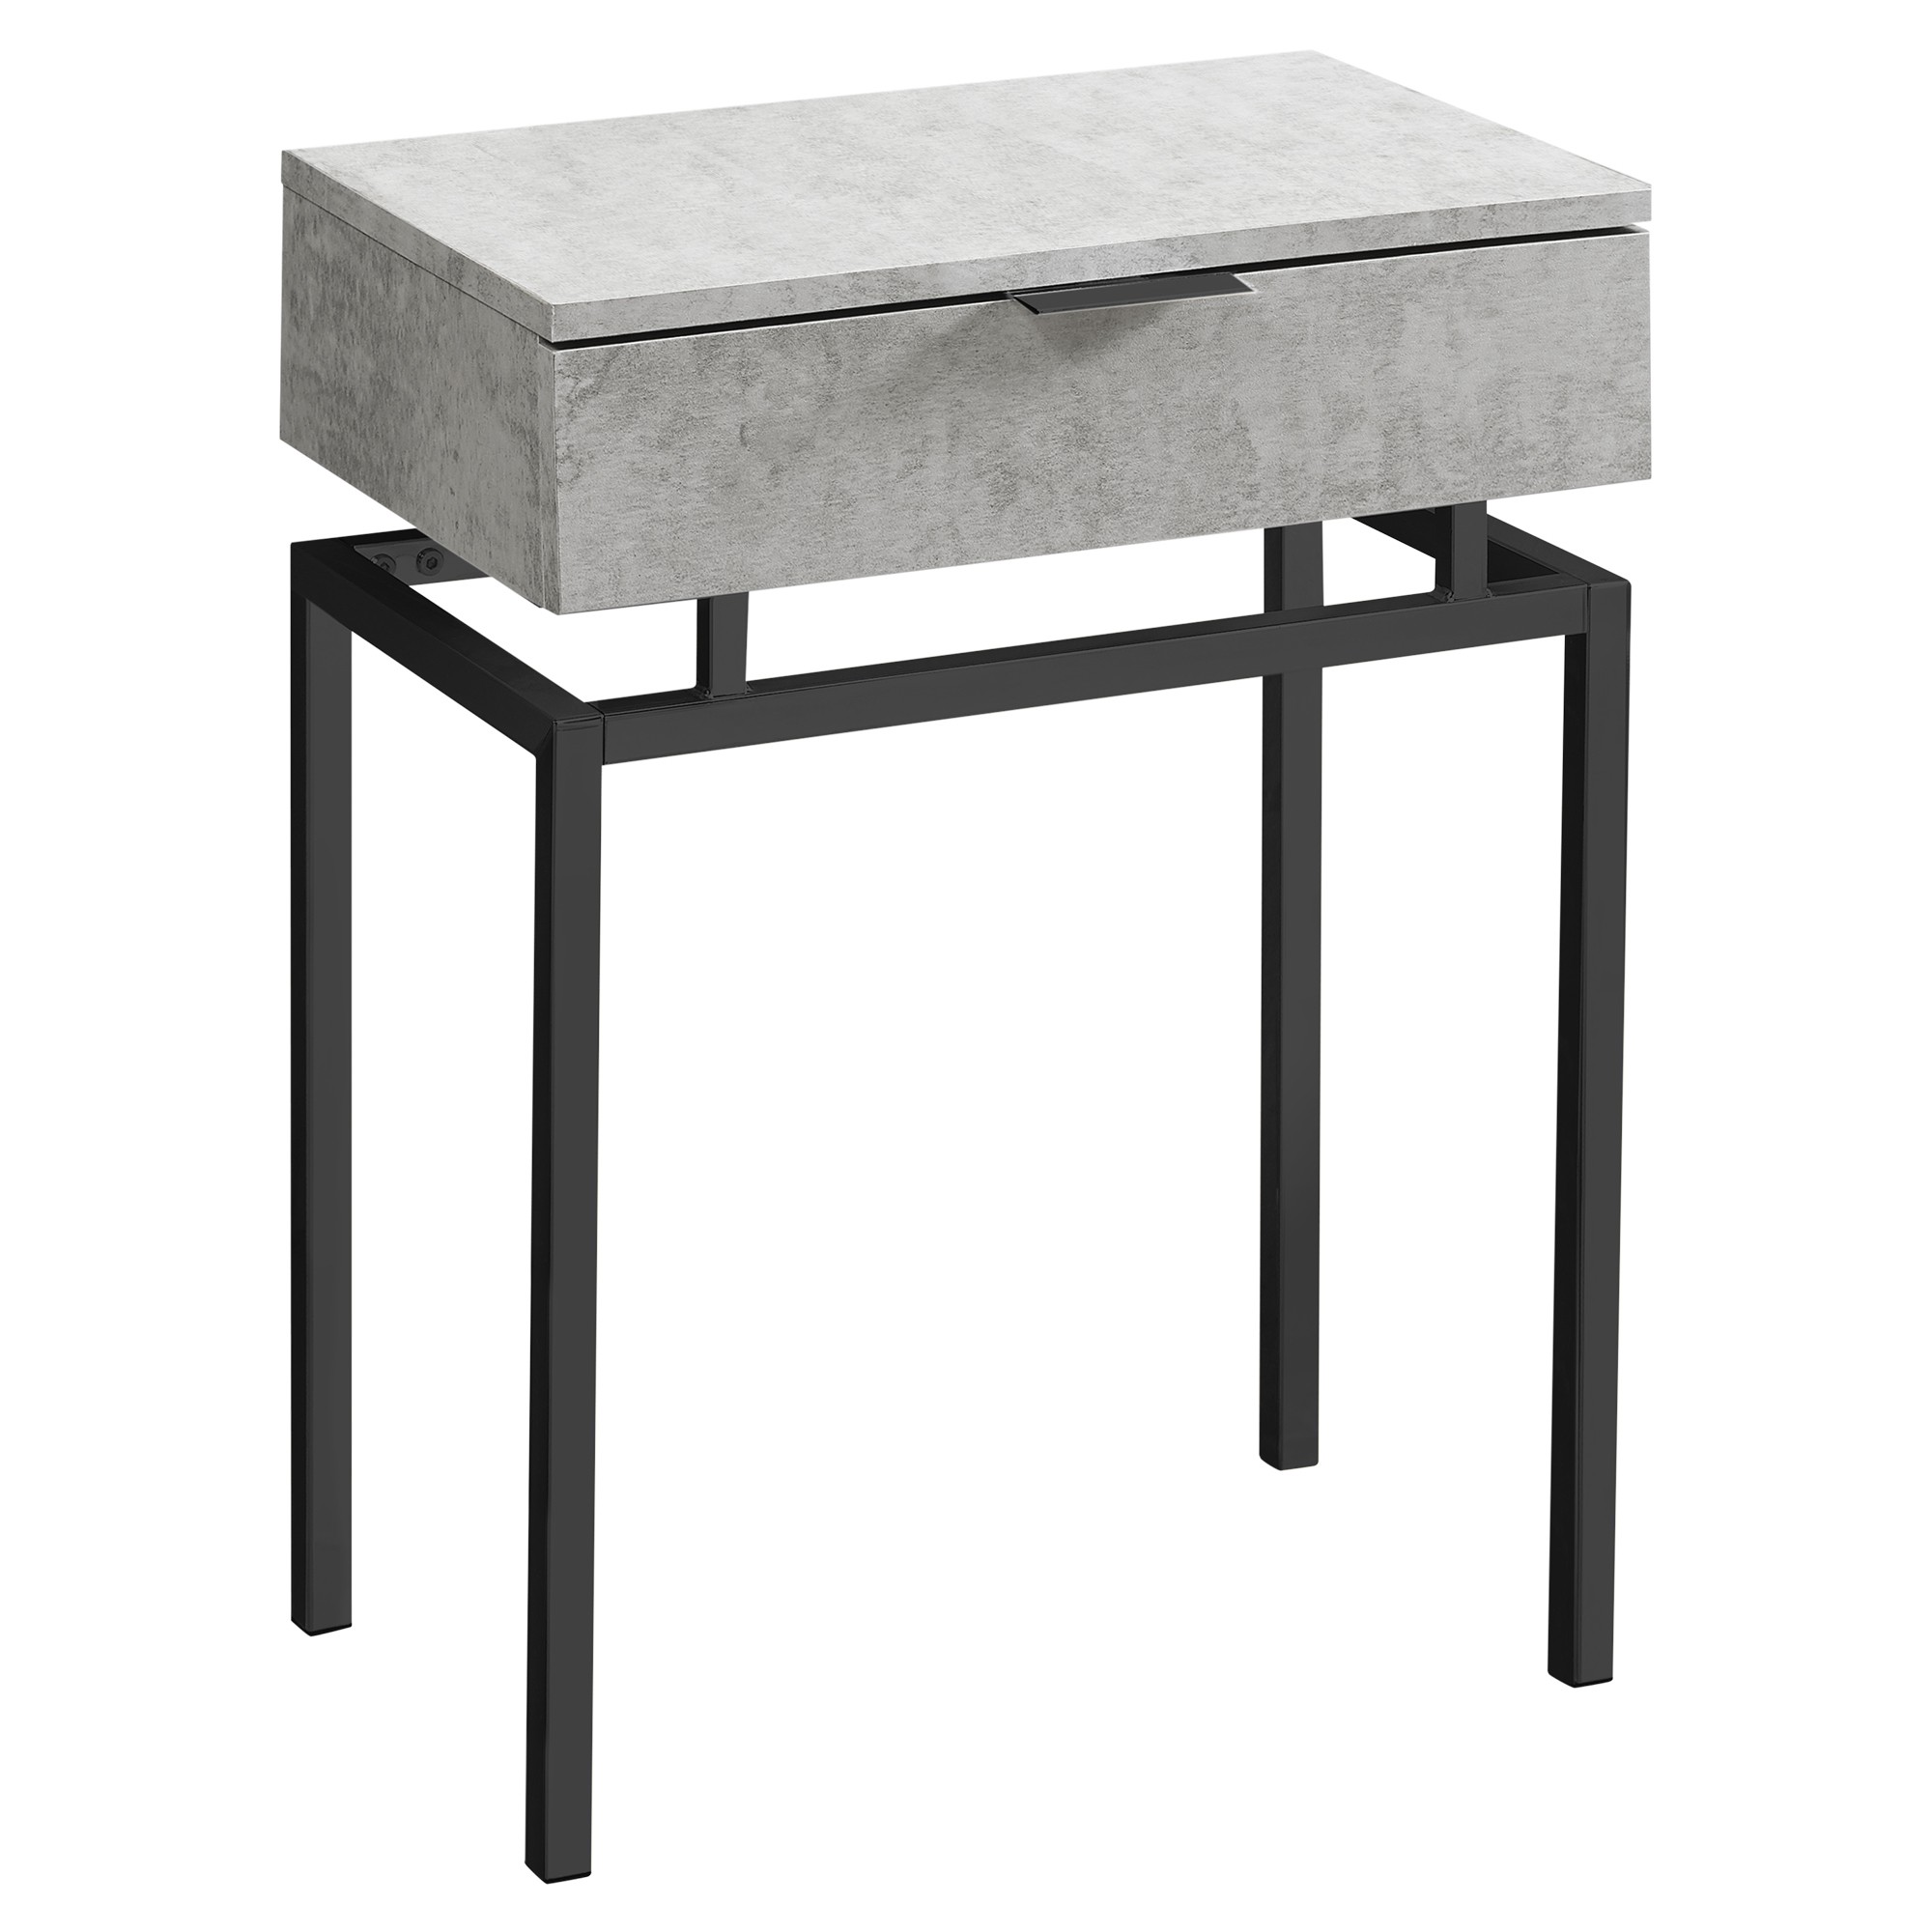 12.75" x 18.25" x 23.25" Grey Finish and Black Metal Accent Table